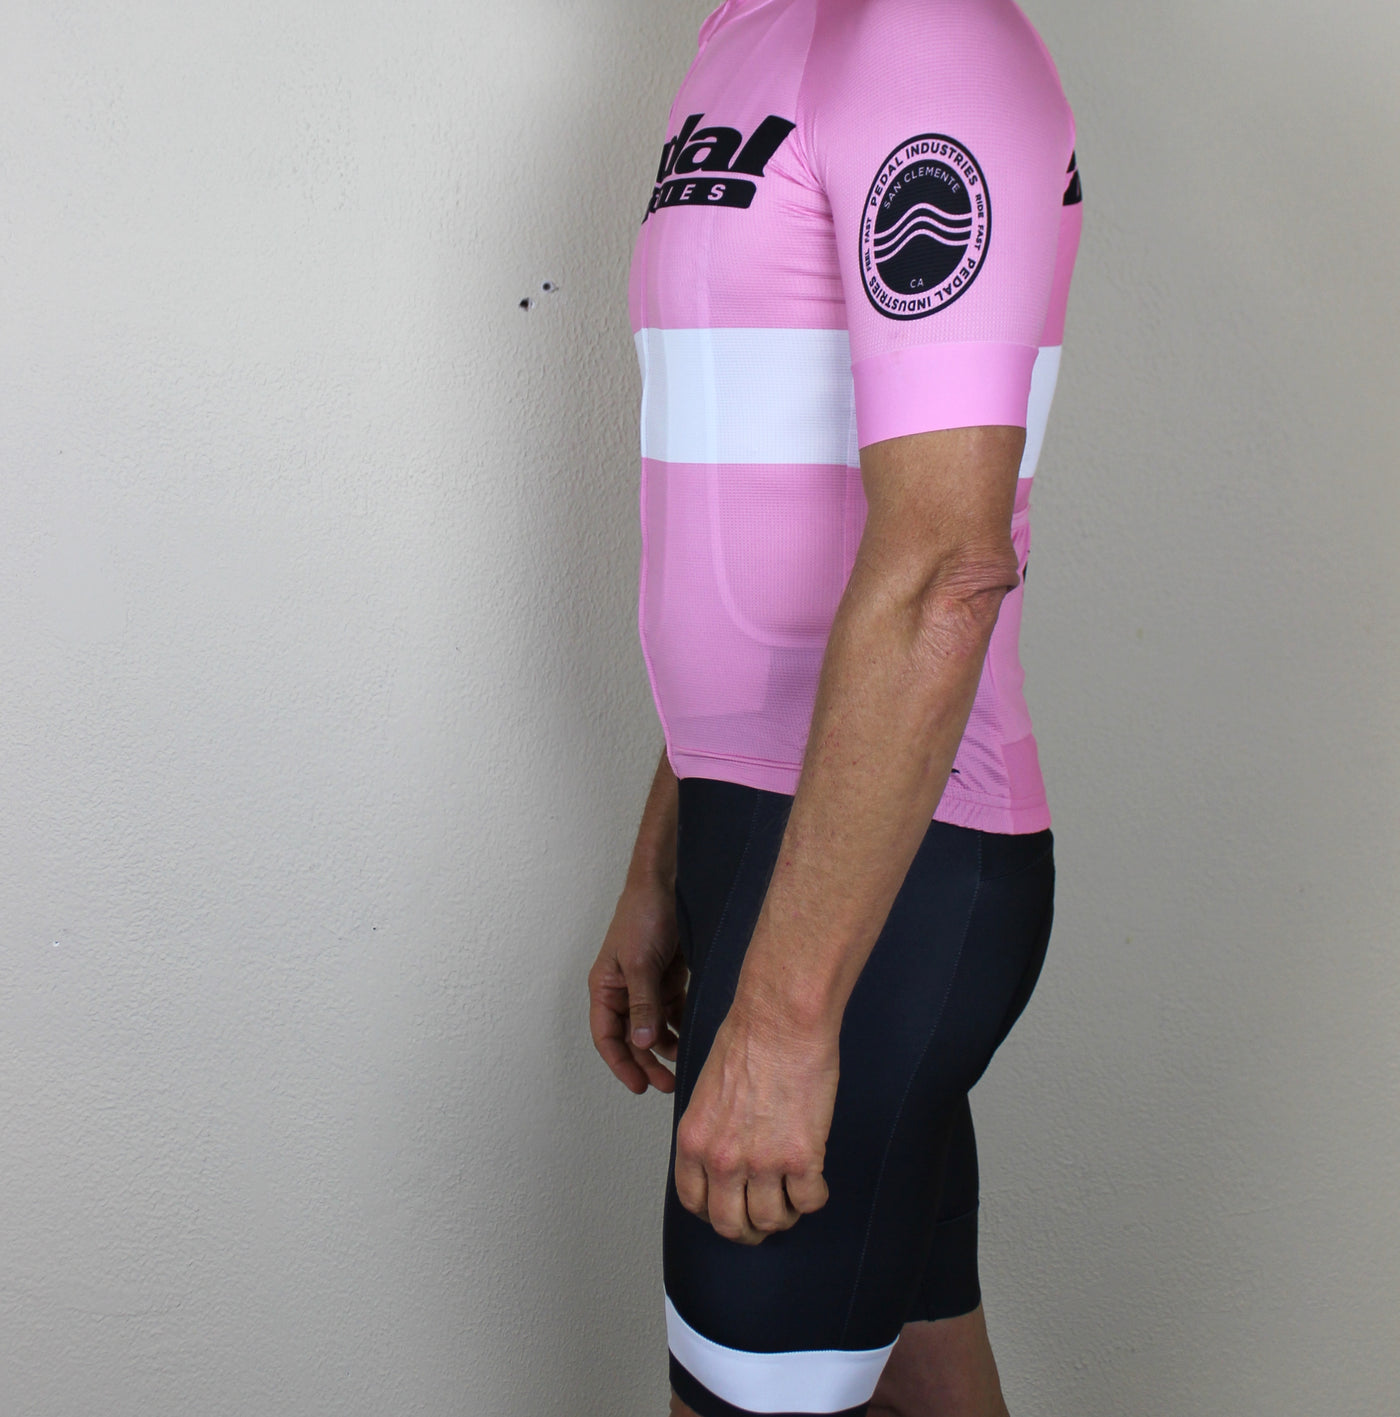 PEDAL industries '19 Team PRO JERSEY 2.0 SHORT SLEEVE - PINK